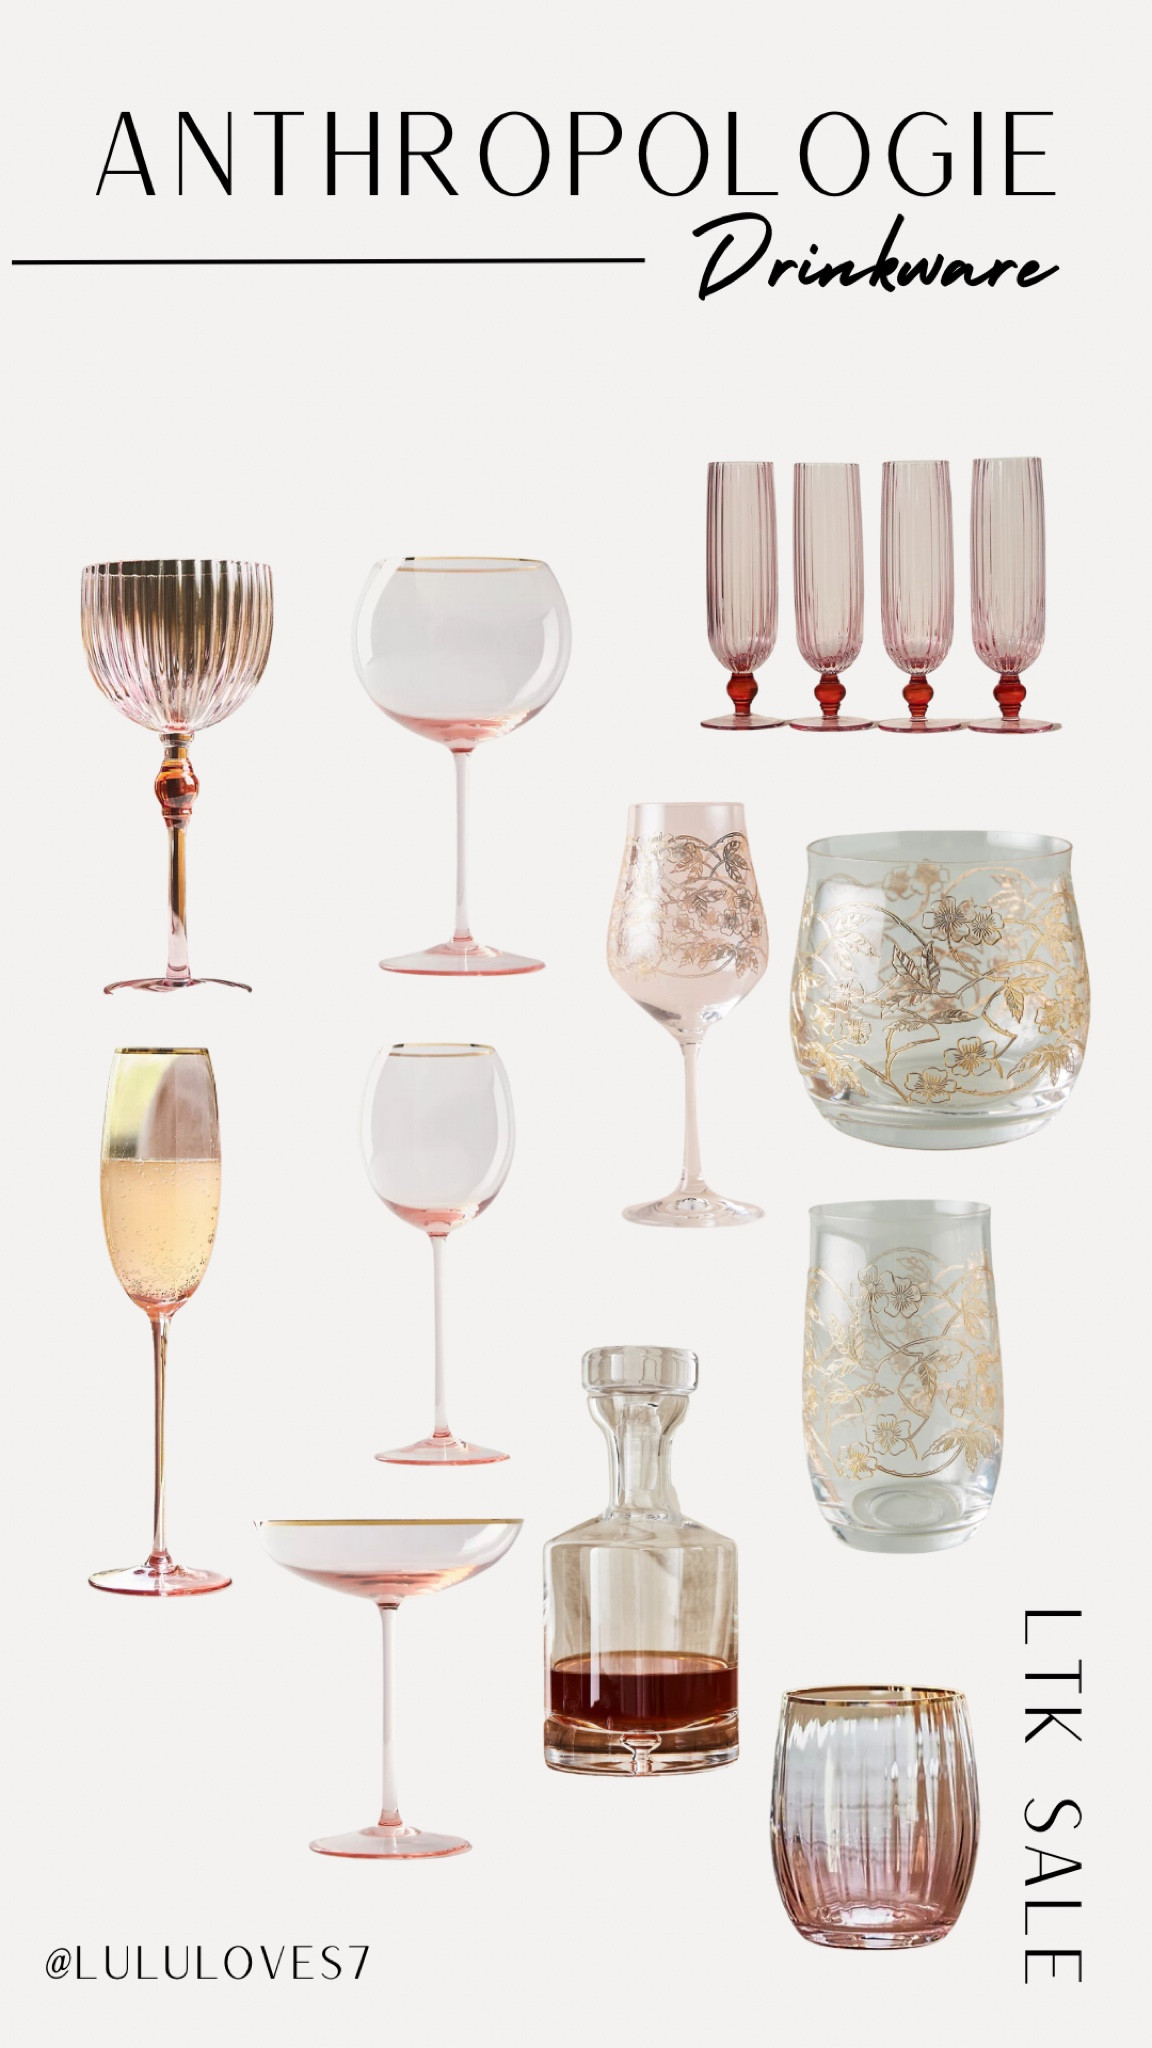 Chamberlain Wine Glasses, Set of 4 curated on LTK